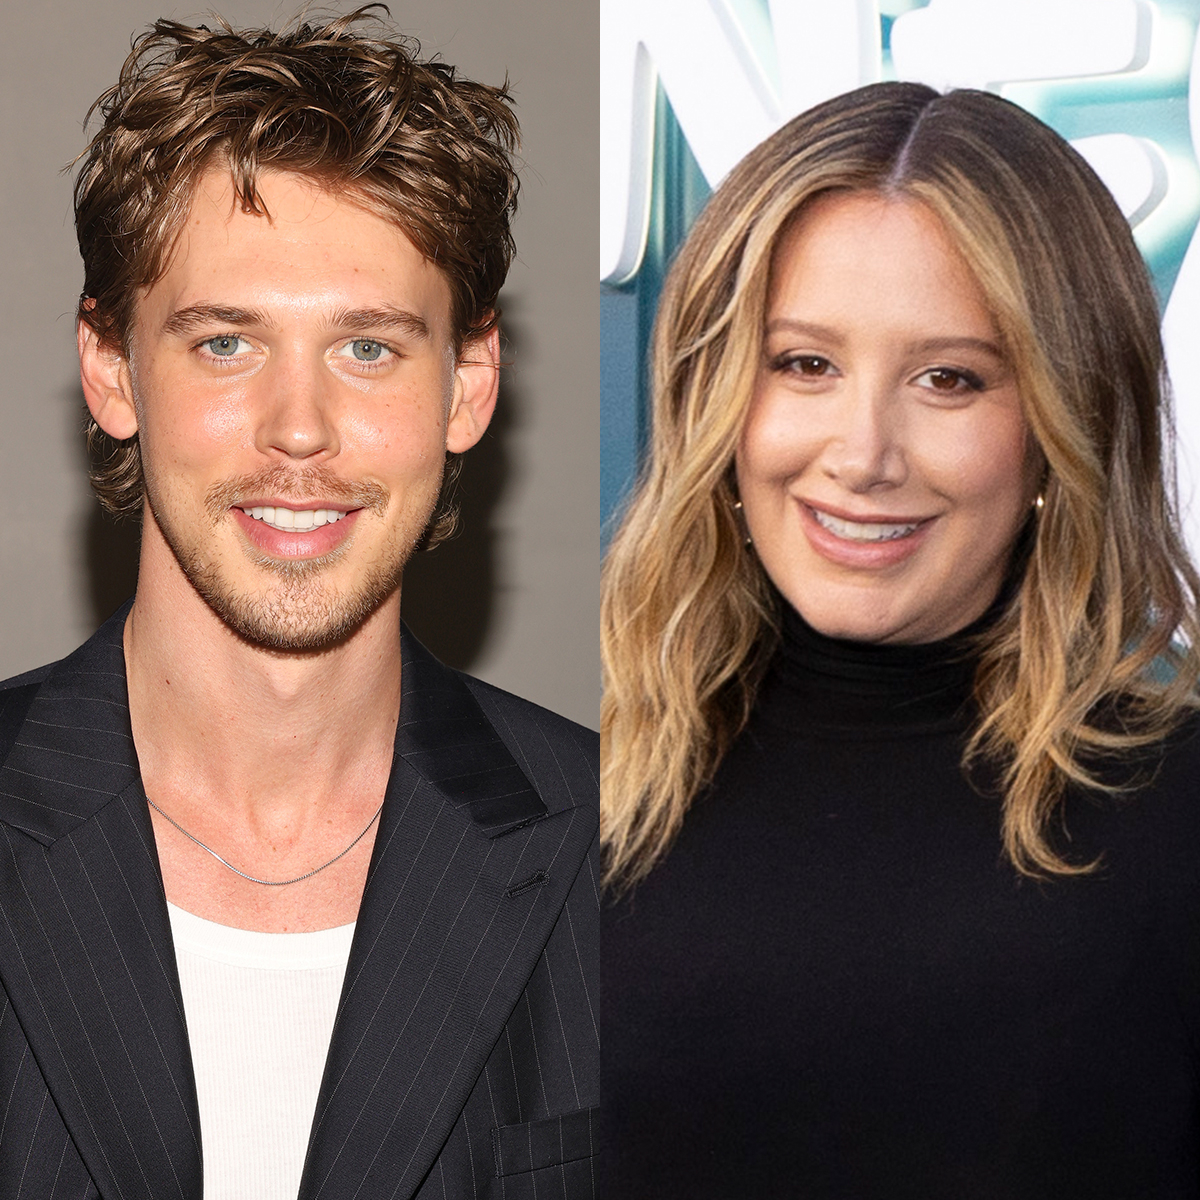 Austin Butler Details Being the “Fun Uncle” to Ashley Tisdale’s Kids